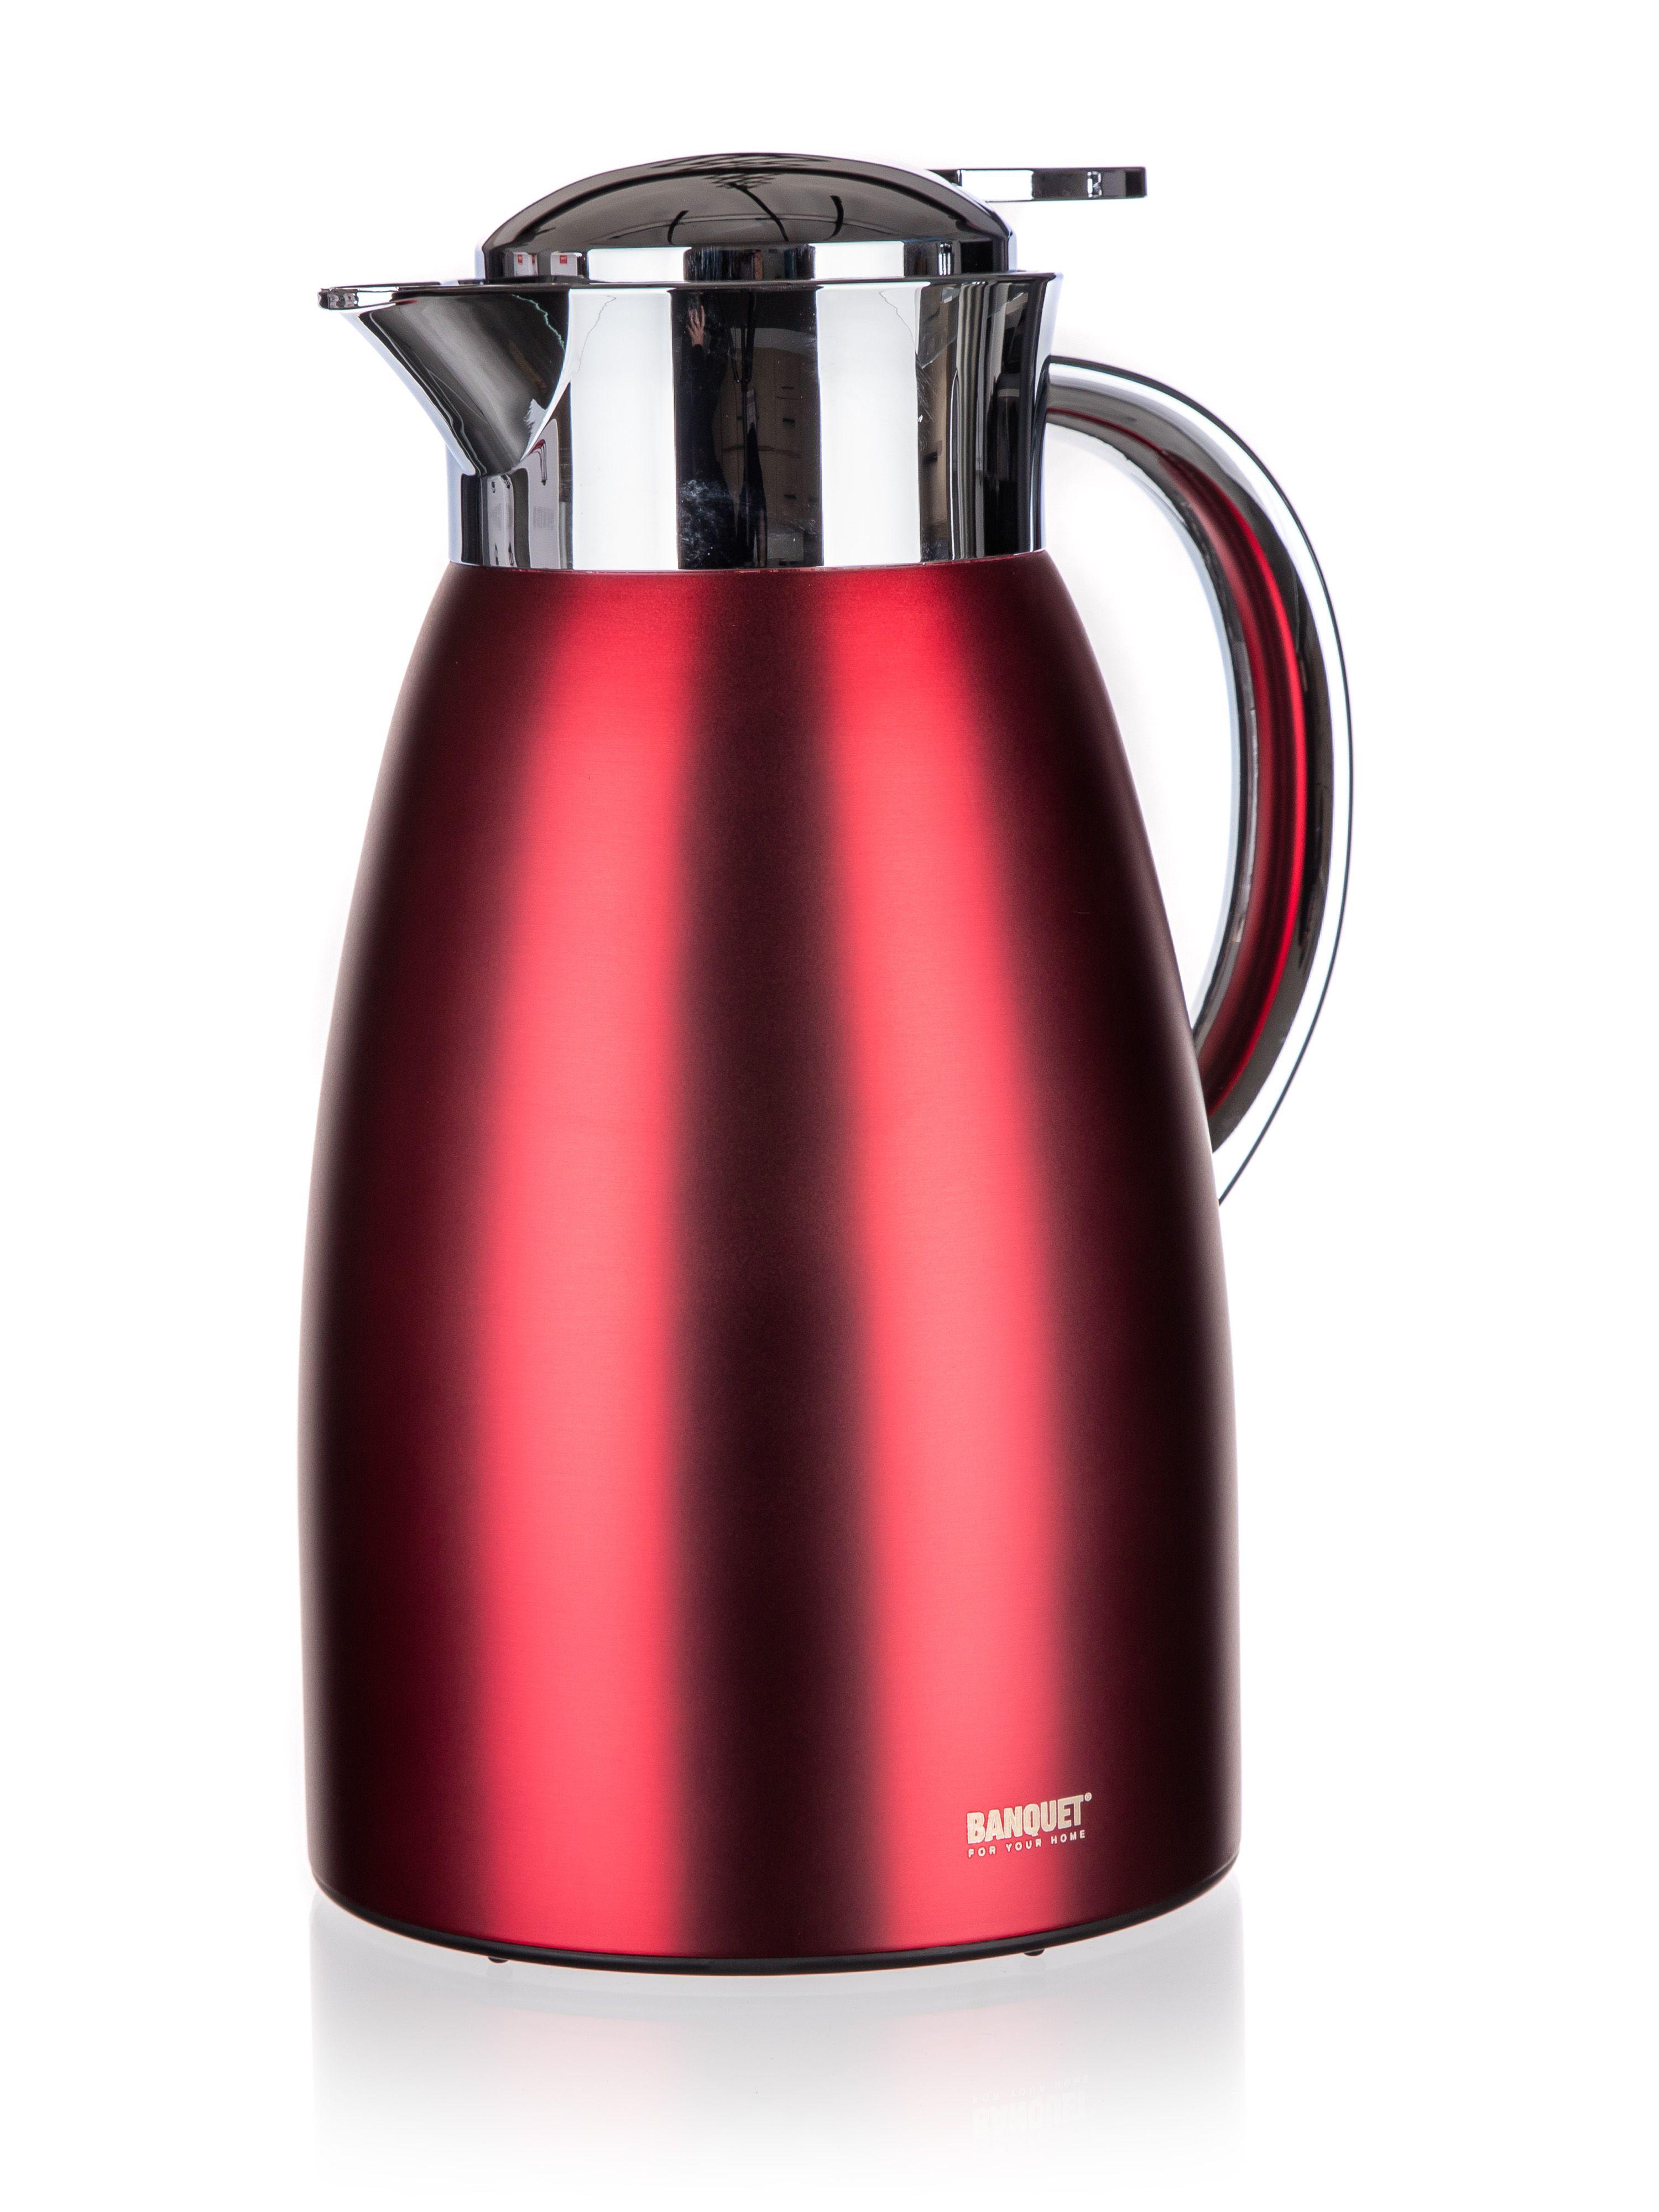 METALLIC Red 1,5 l stainless steel double wall kettle